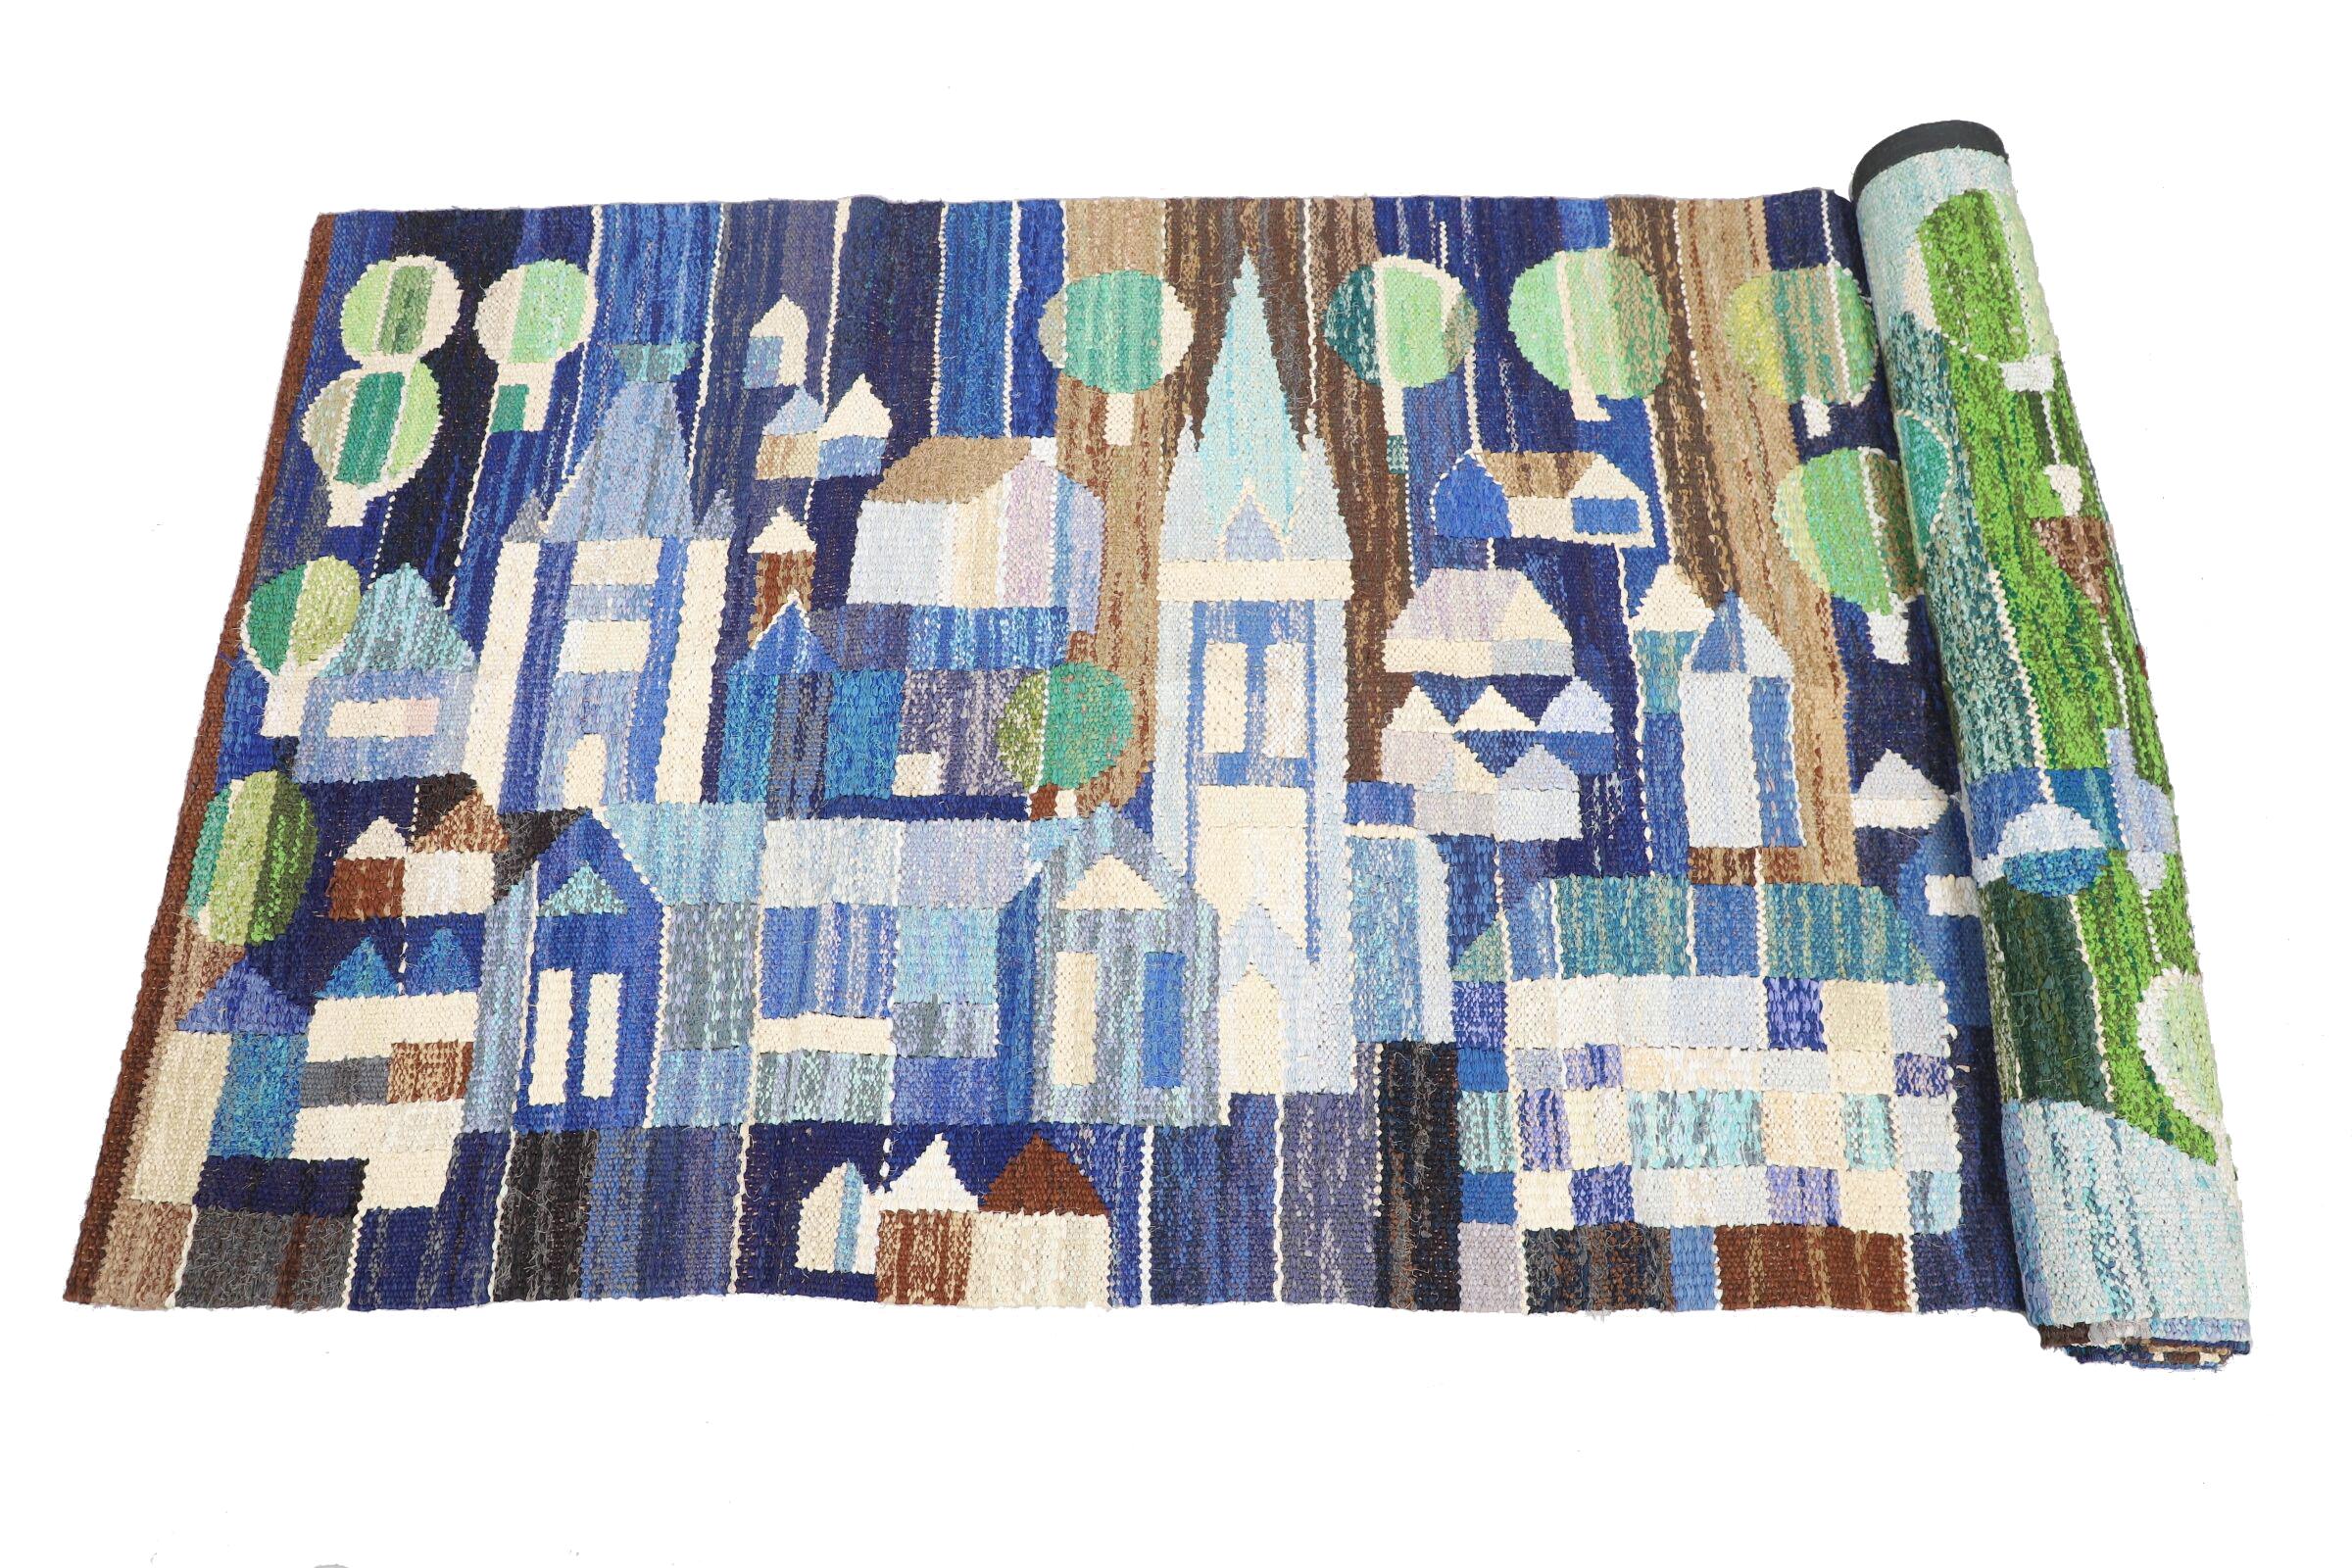 Very long Swedish rug depicting a small village in shades of blue, green, and brown An elegant and modern interpretation by a gifted unknown designer. Discover an exclusive masterpiece - the one and only of its kind. This extraordinary object stands